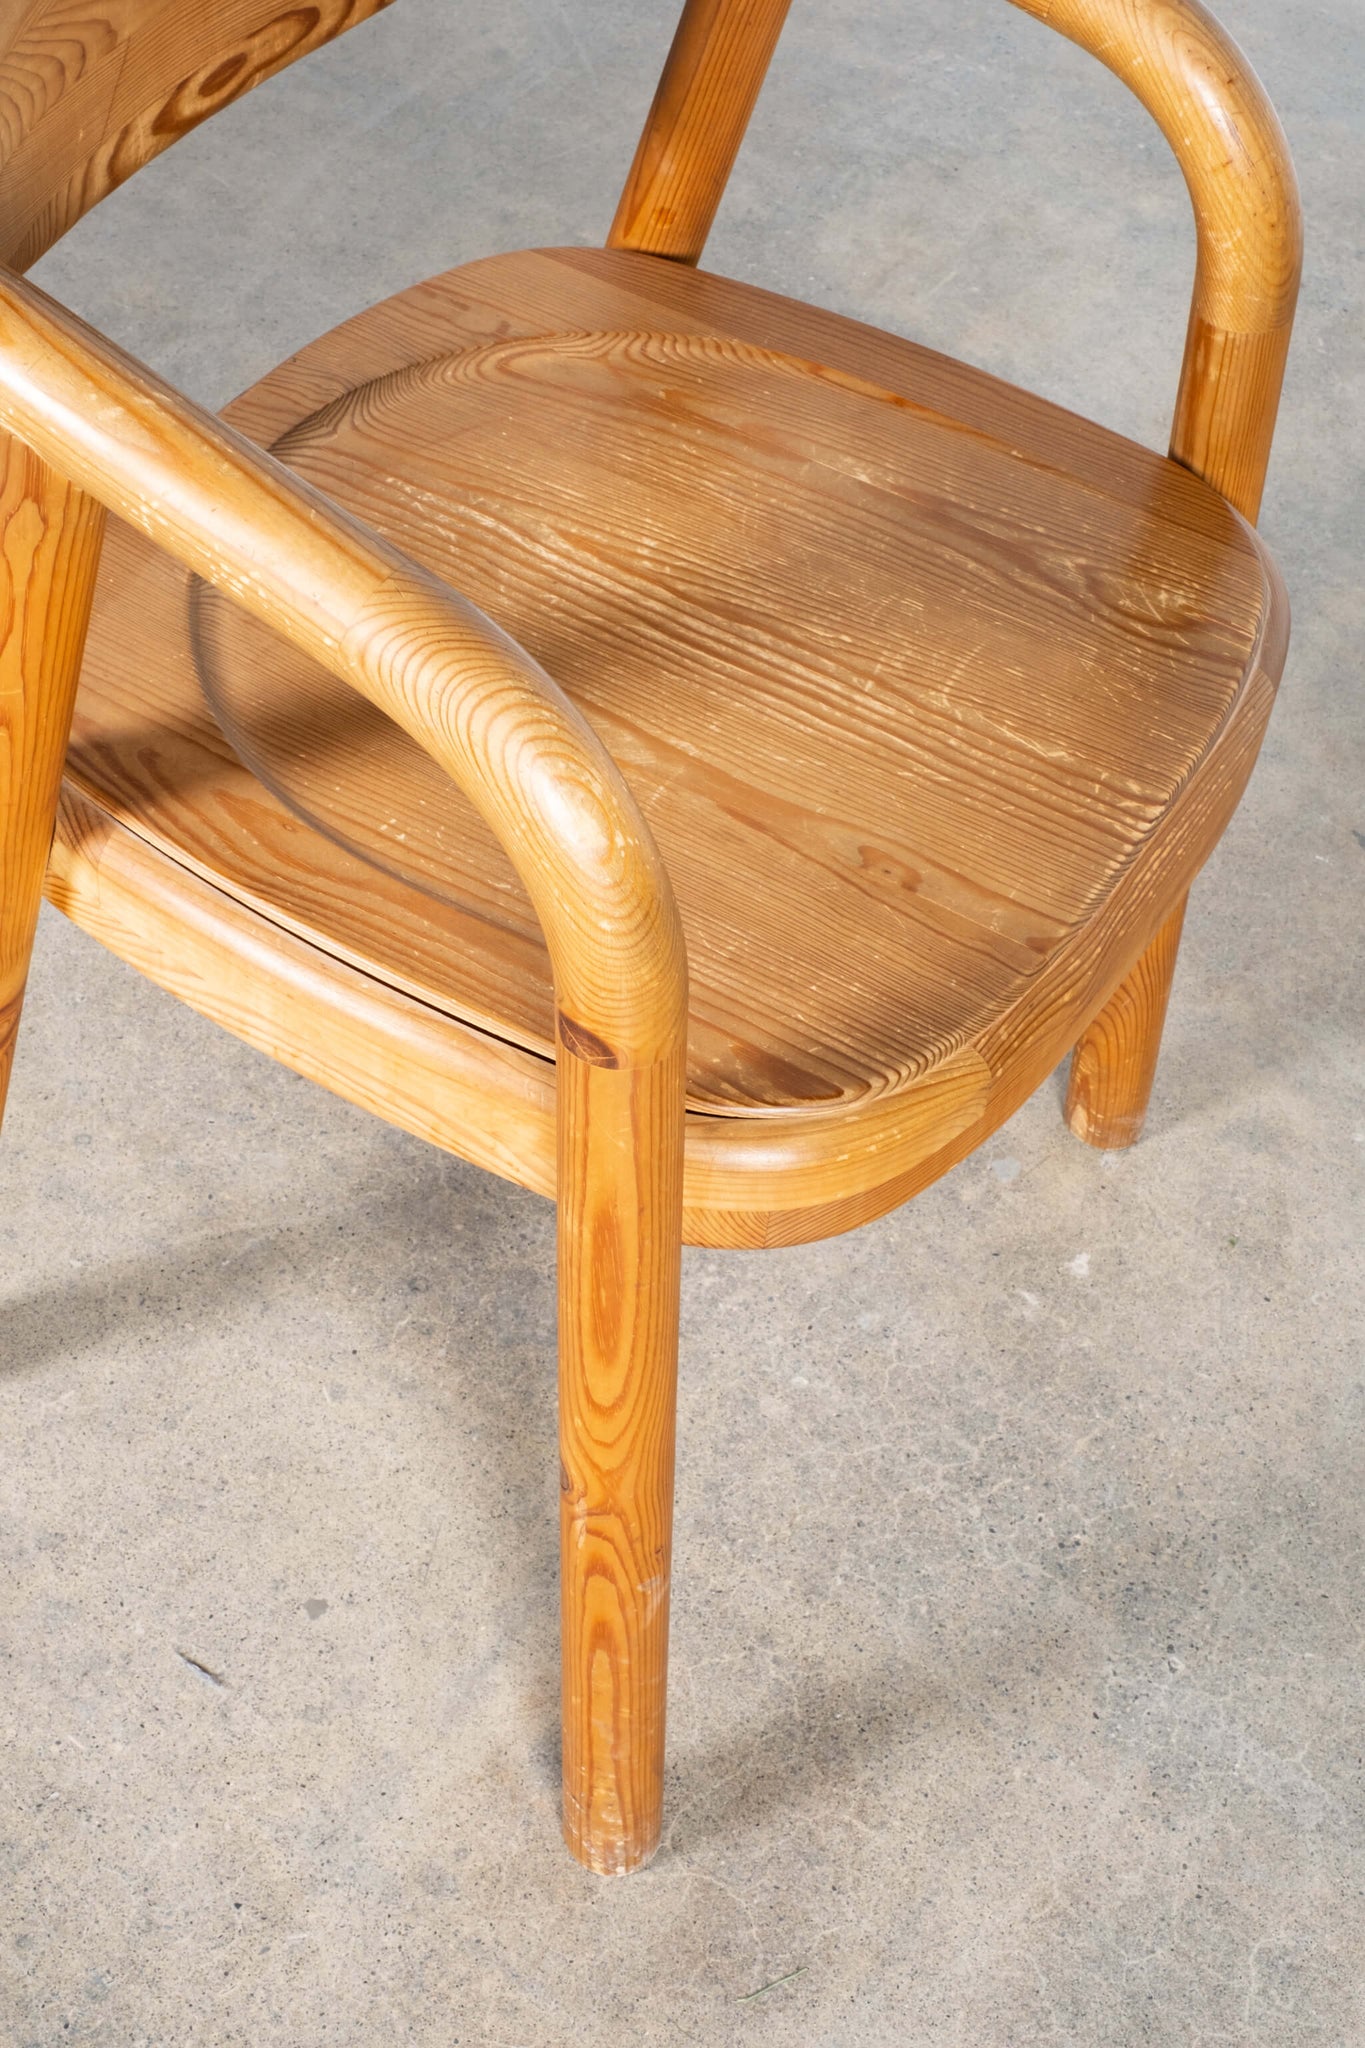 Vintage Solid Pine Curved Arm Chair, seat detail